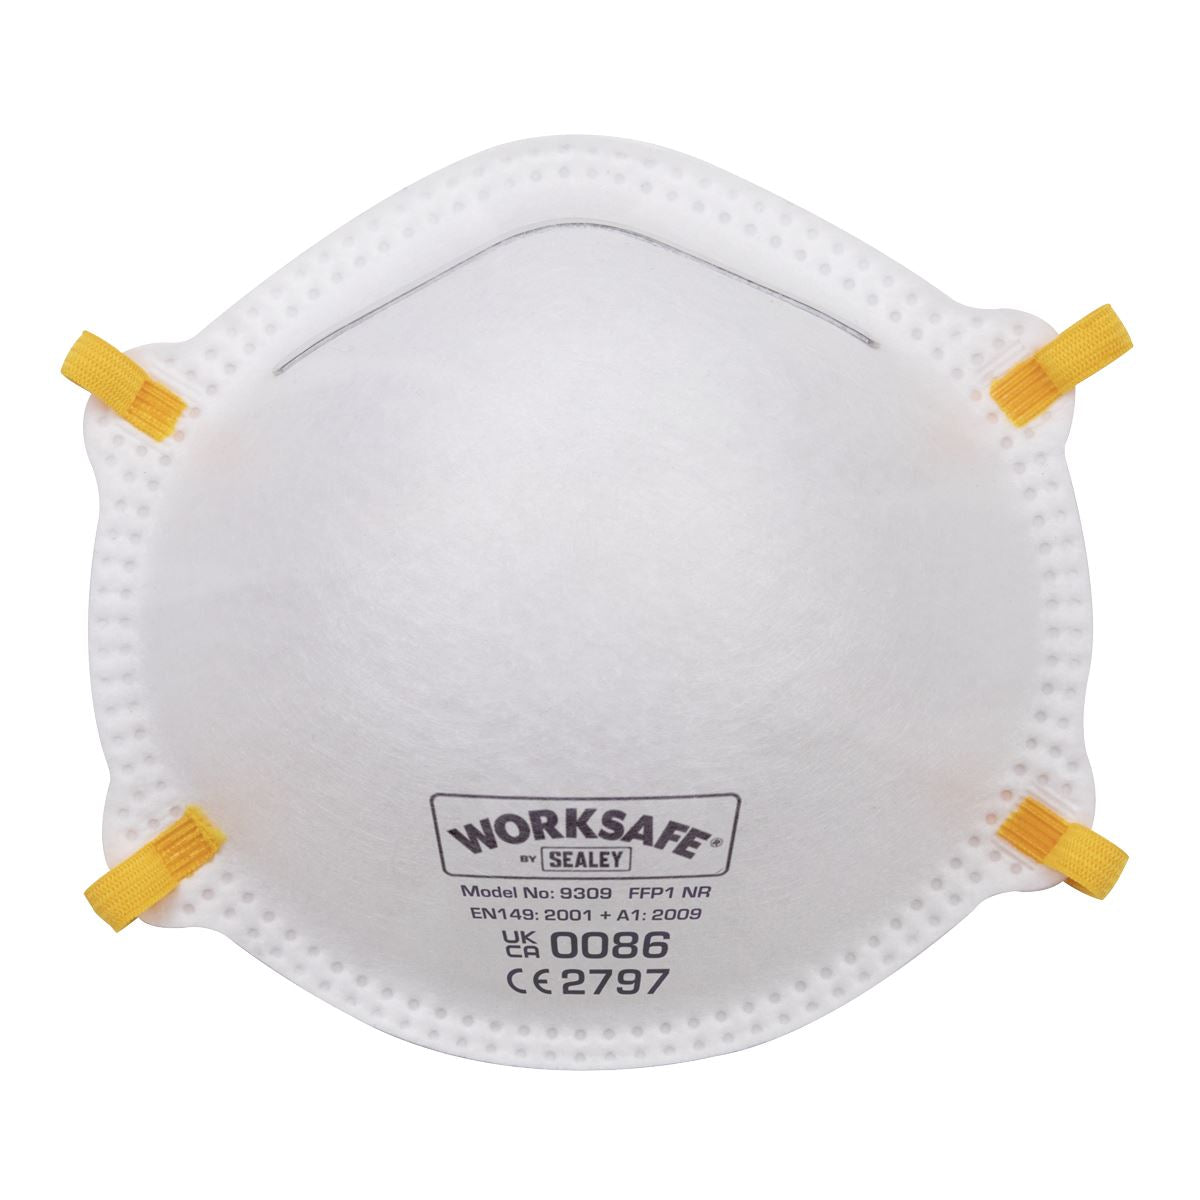 Worksafe by Sealey Cup Mask FFP1 - Pack of 3